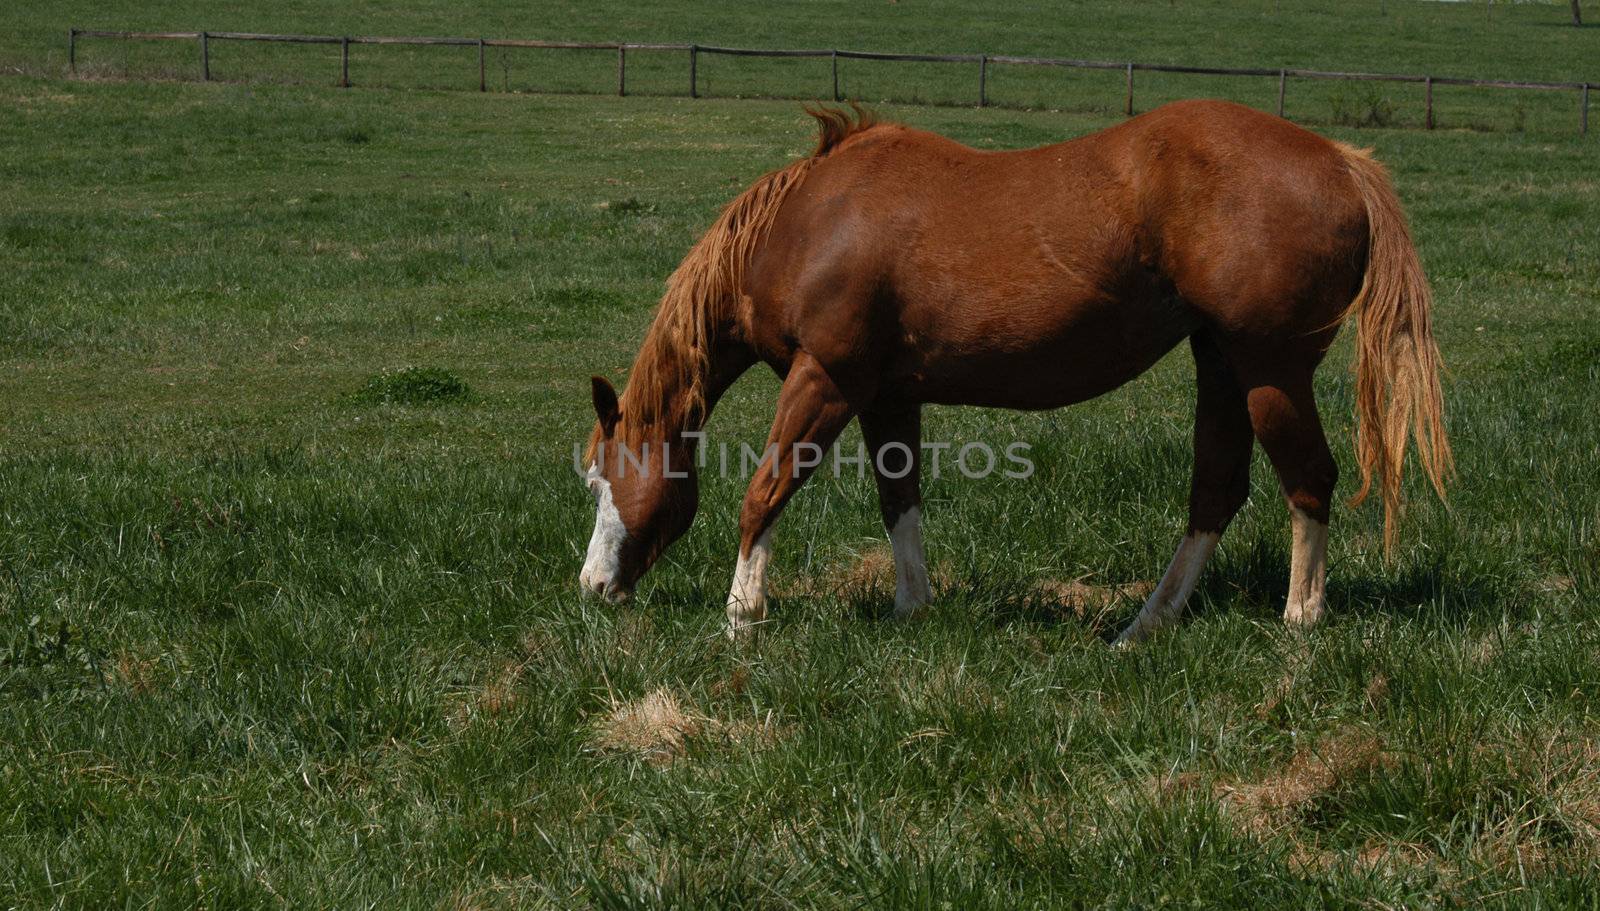 A horse eating grass in the pasture